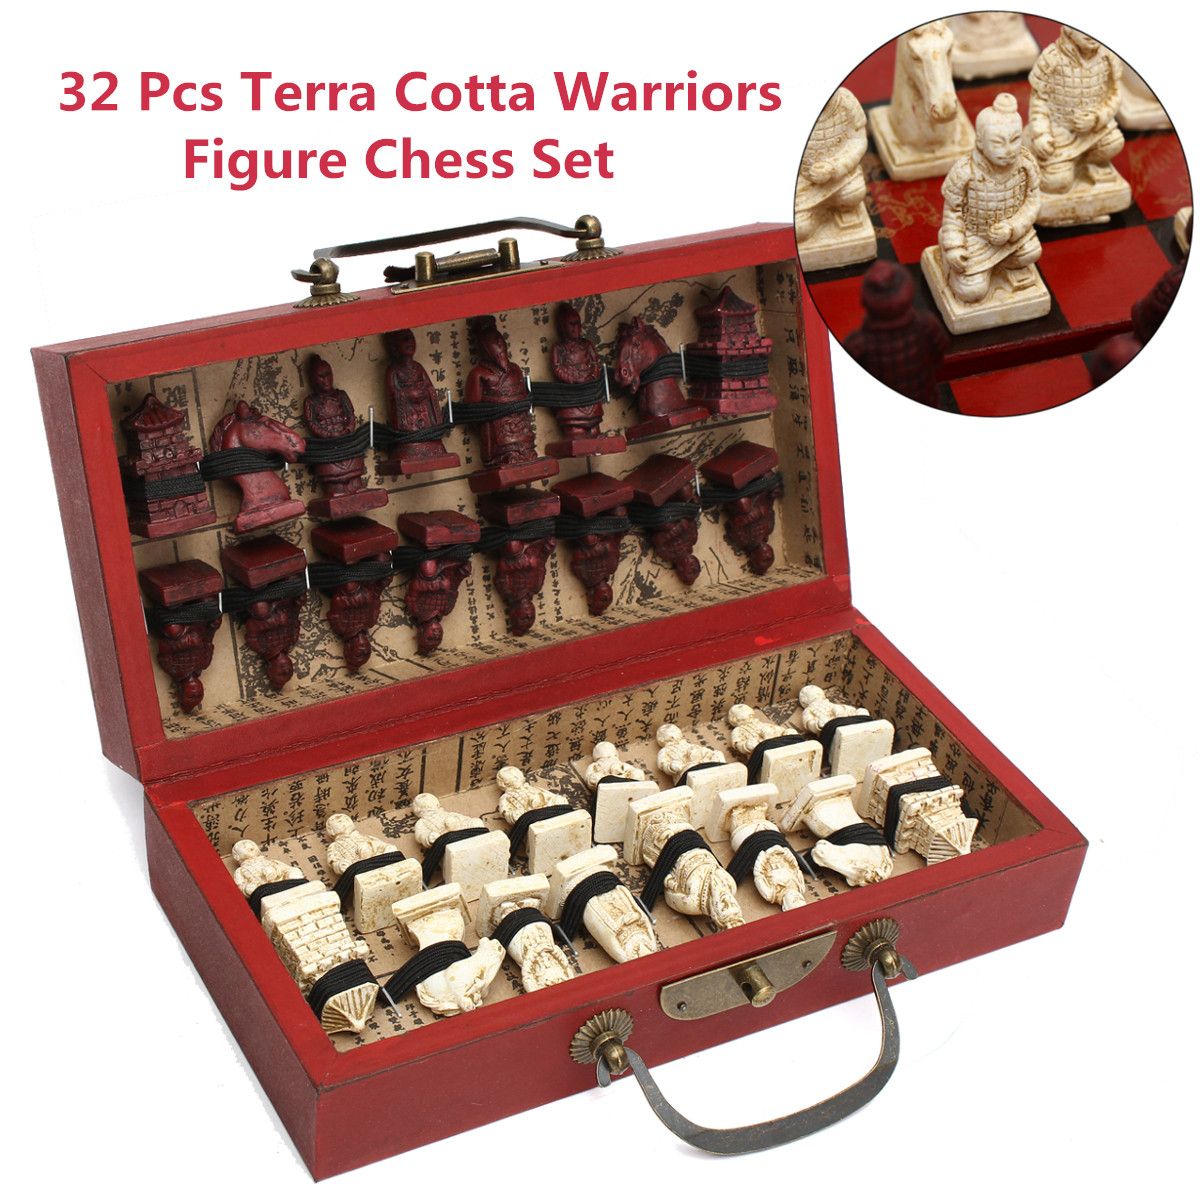 32-Pcs-Terra-Cotta-Warriors-Figure-Chess-Set-with-Chinese-Wood-Leather-Box-Board-Games-1473219